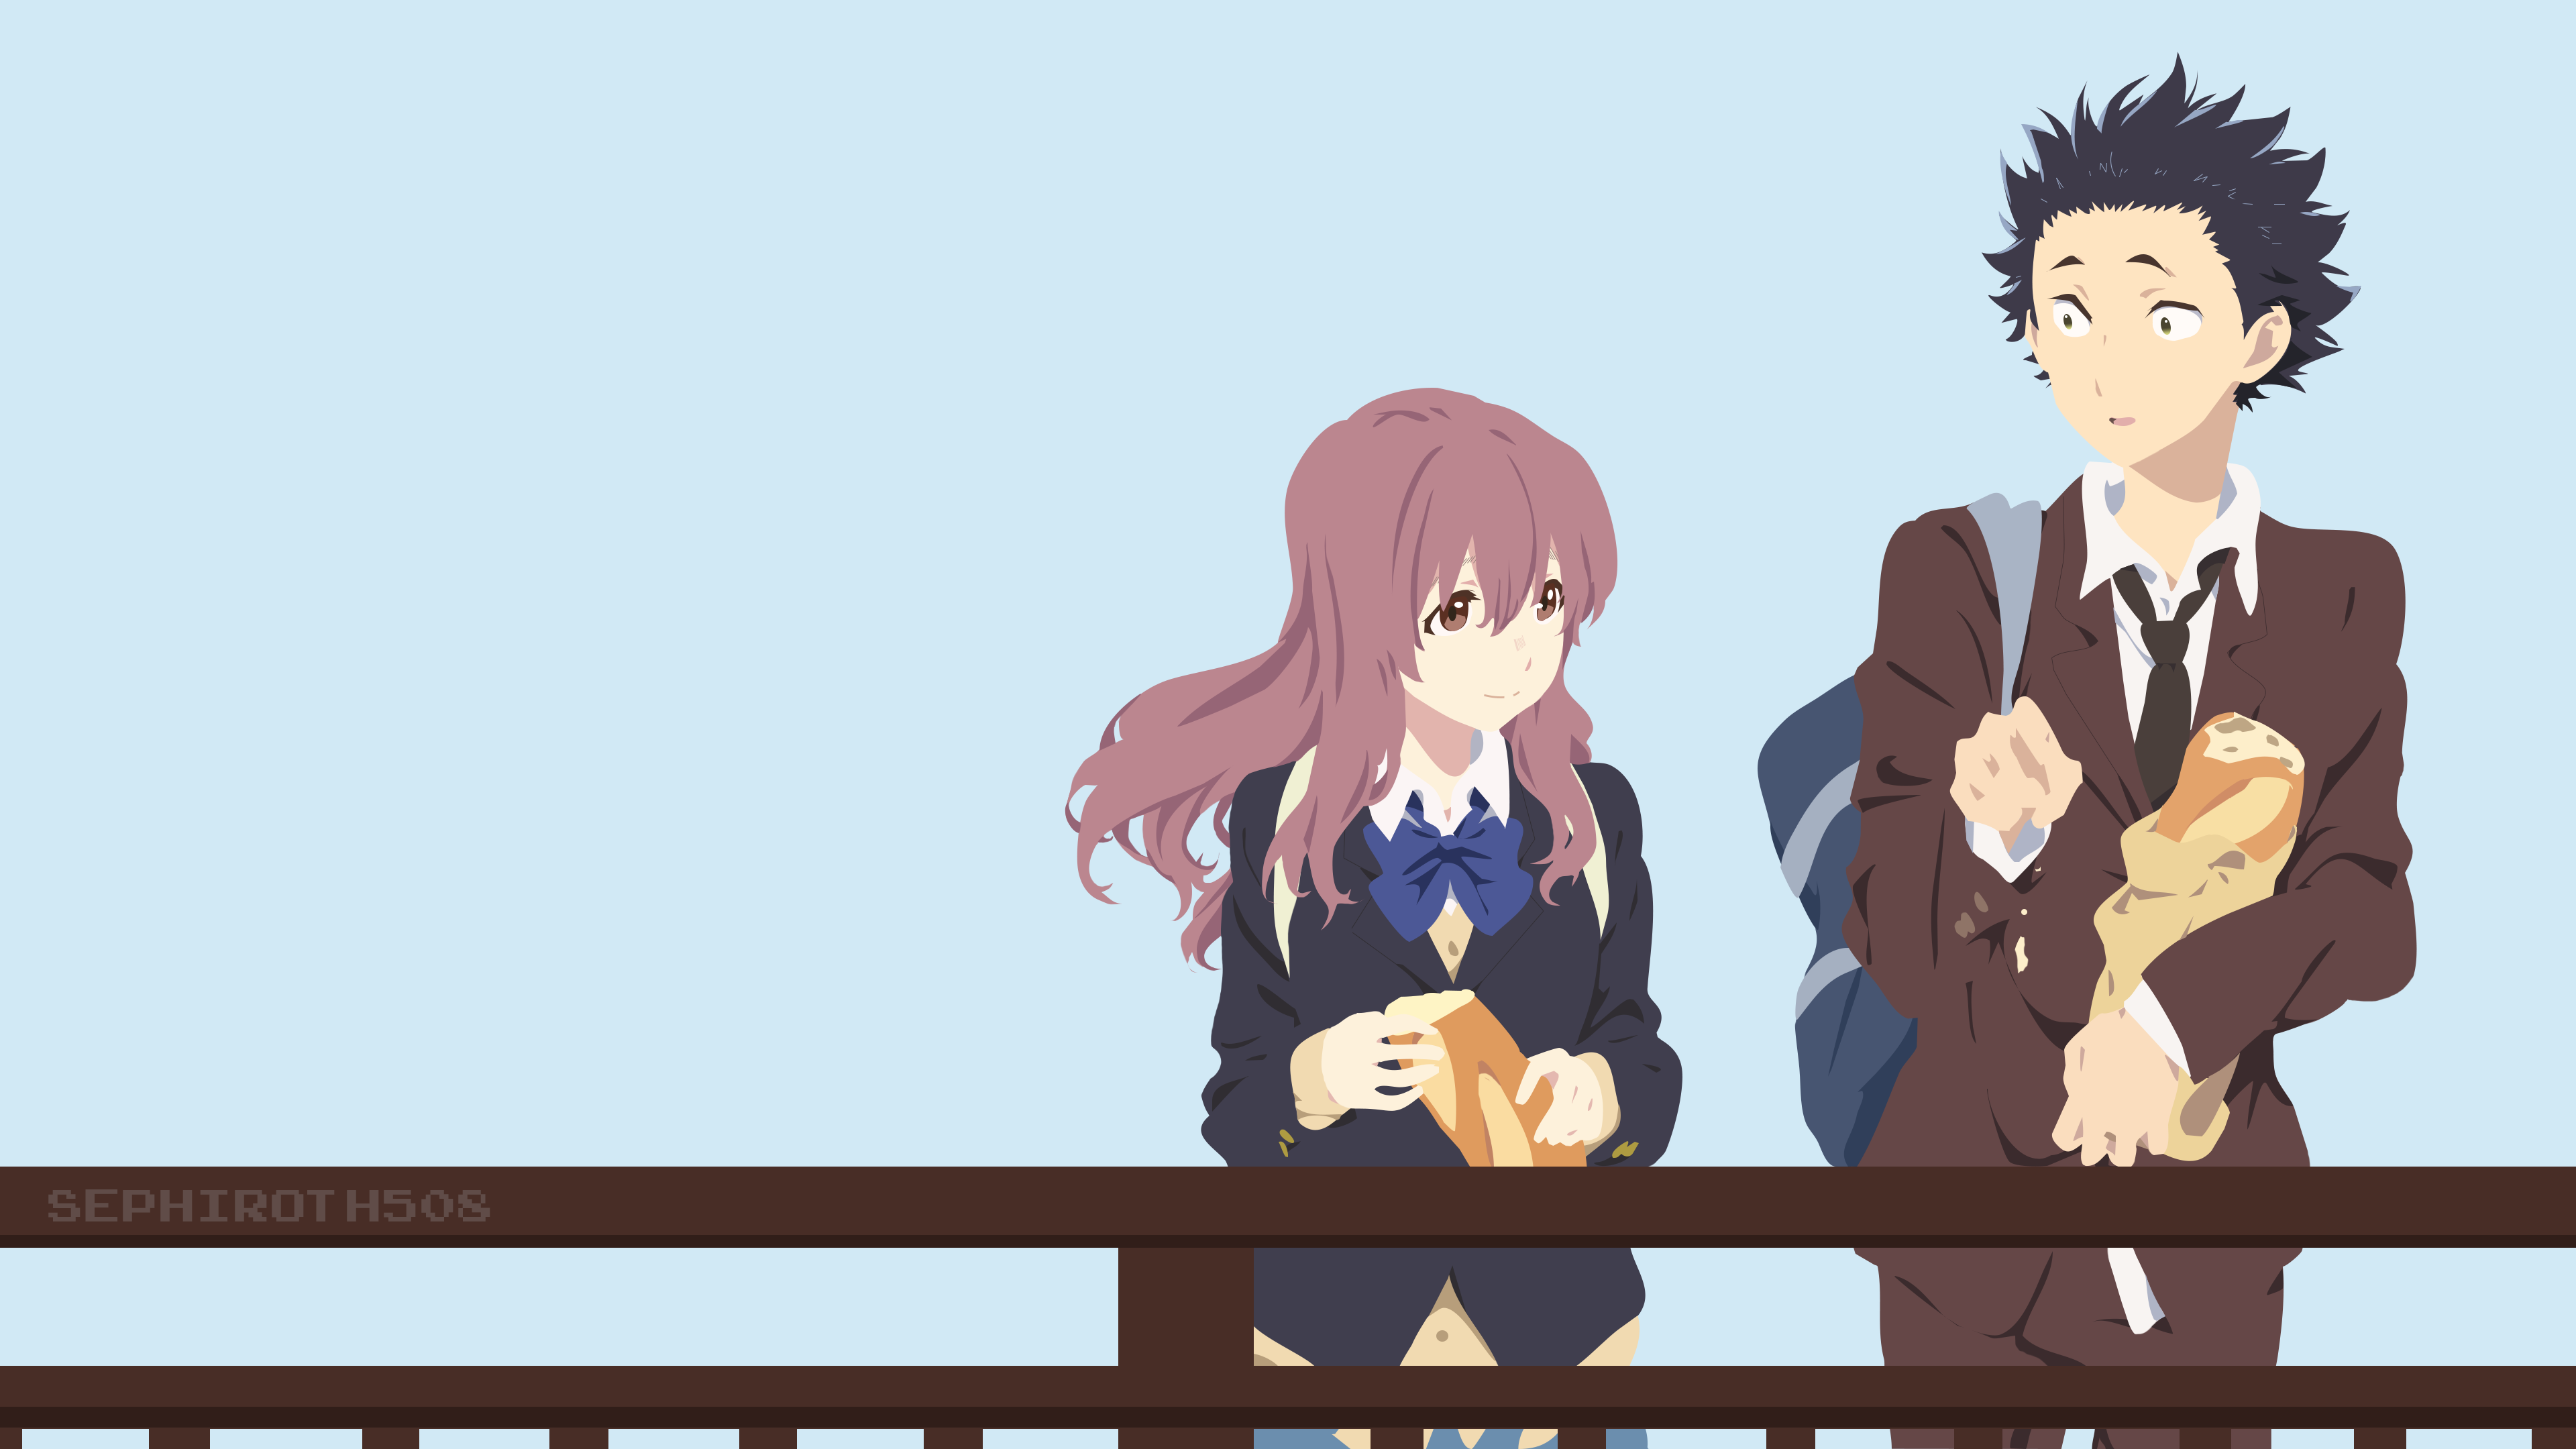 A Silent Voice HD Wallpaper Free A Silent Voice HD Background